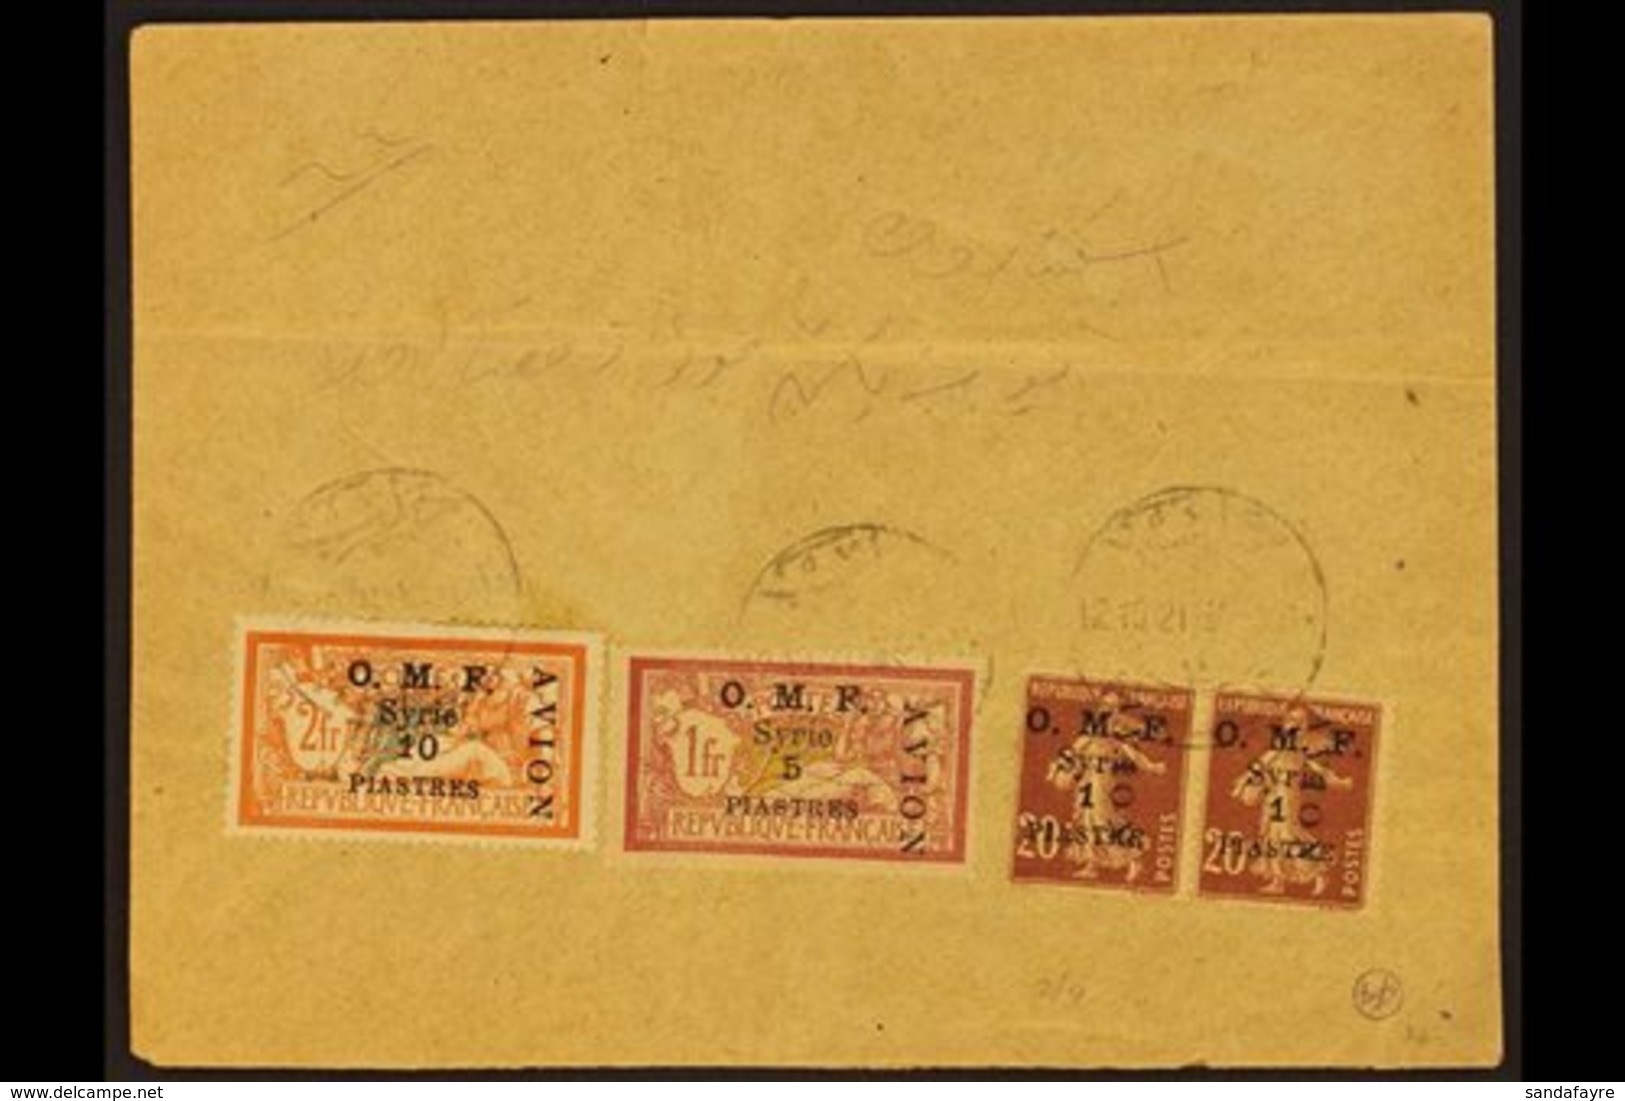 1921  Airmail Set Complete On Flown Cover Halep To Damas, SG 86/9, Cover Fold But Stamps Very Fine. For More Images, Ple - Siria